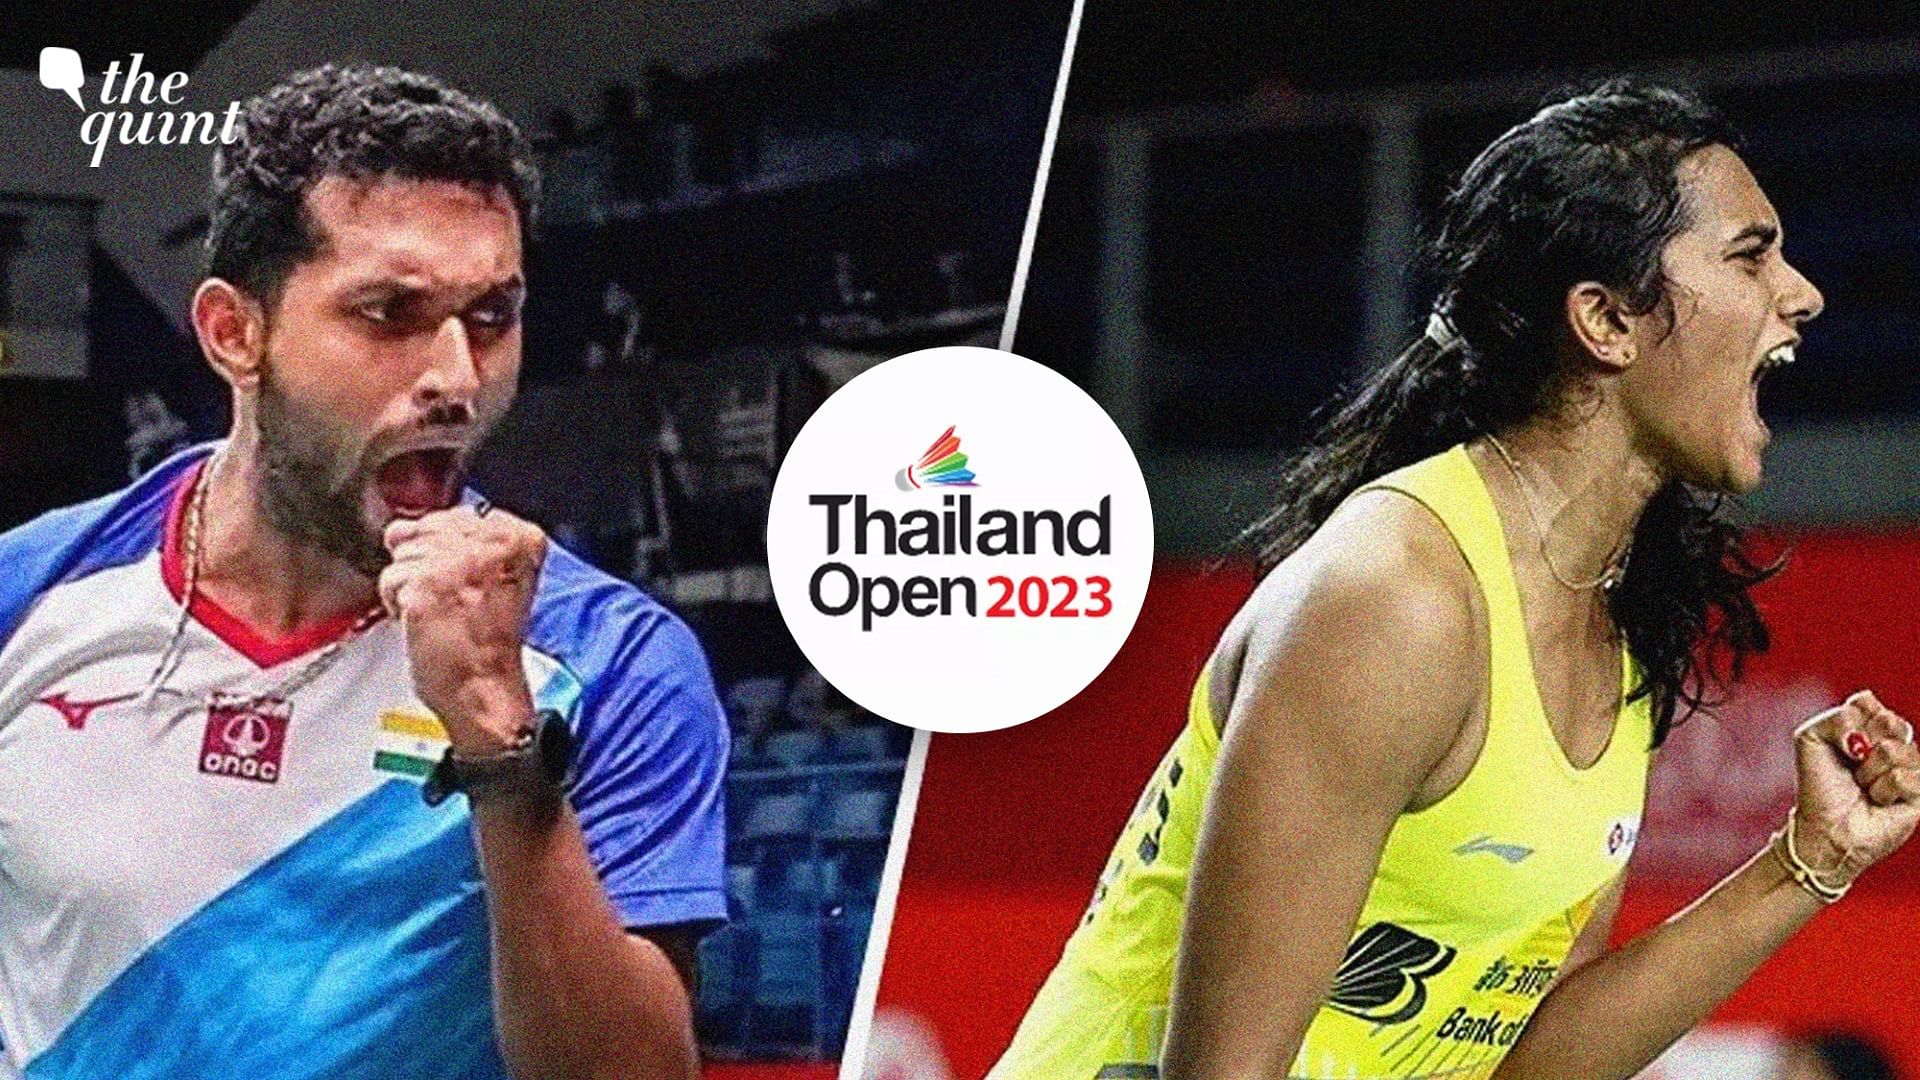 Thailand Open 2023 Badminton Tournament Starts Today on Tuesday, 30 May